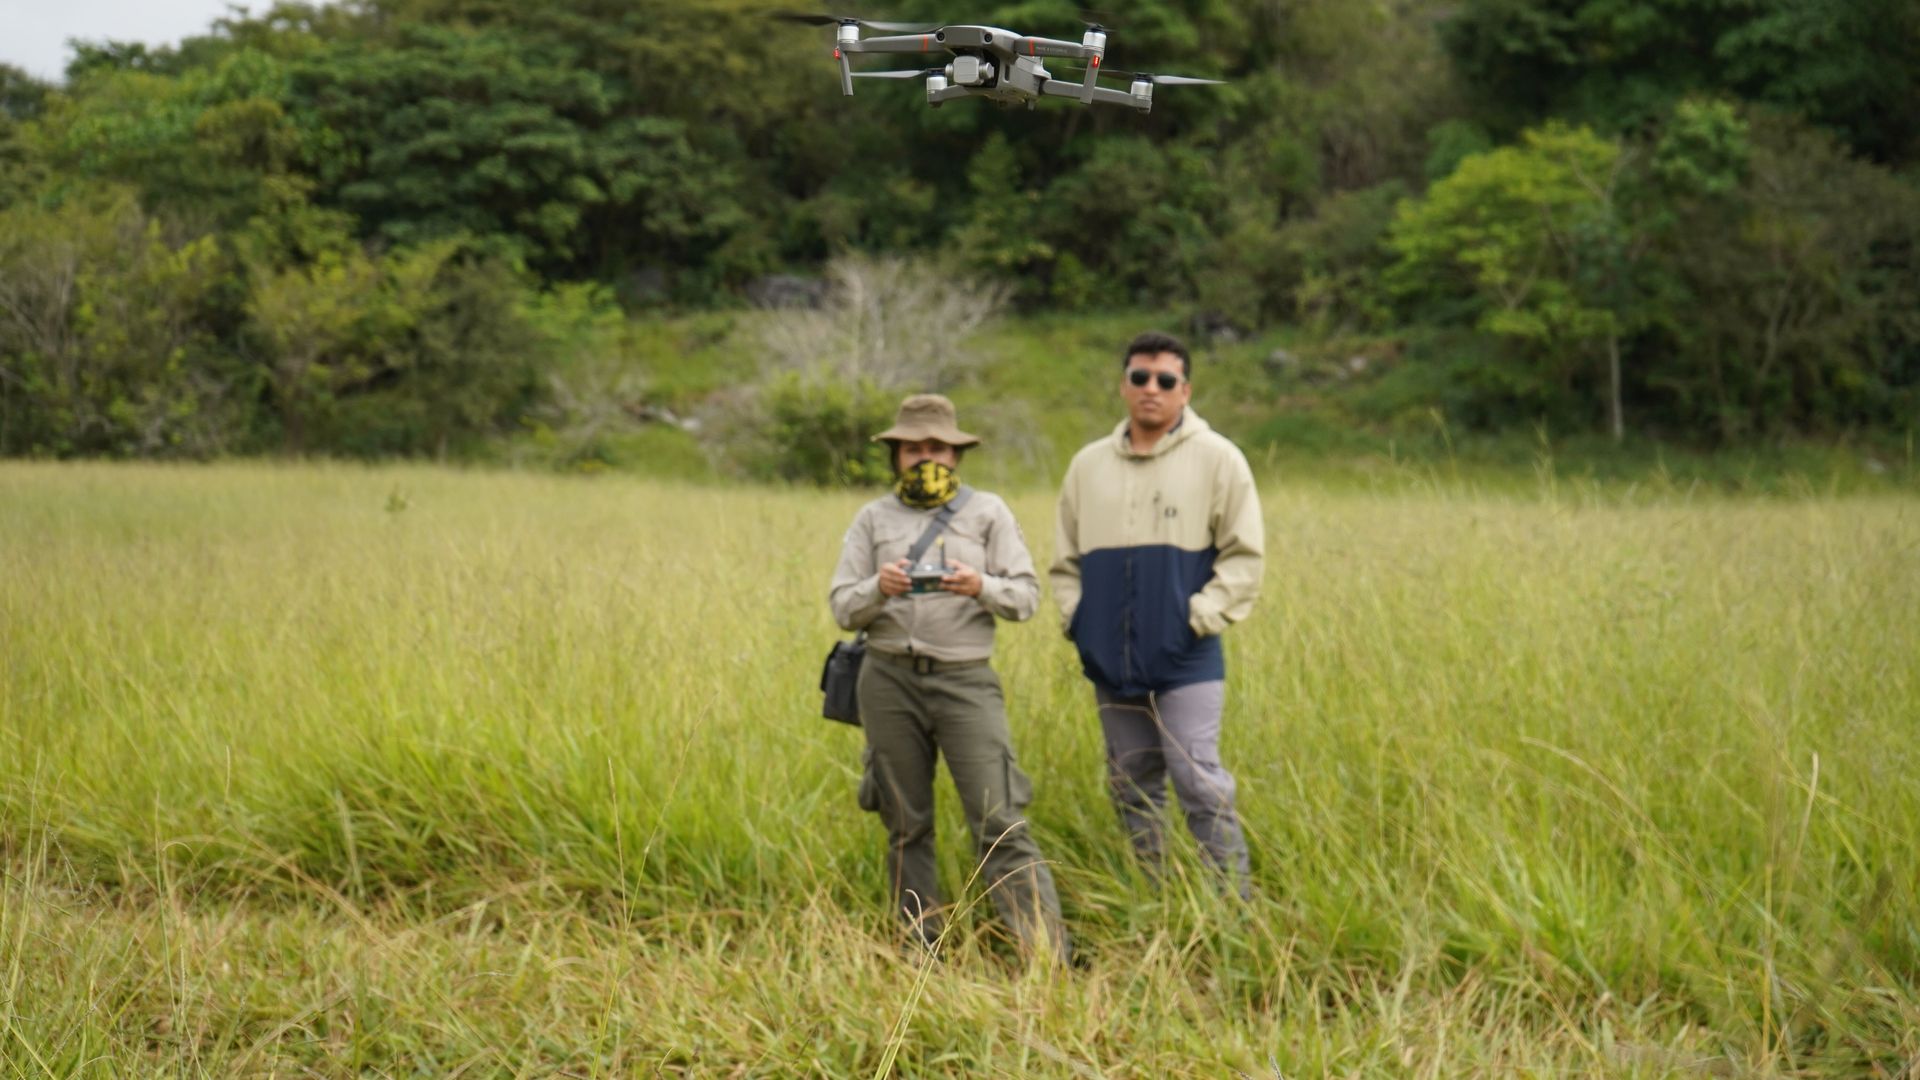 A person pilots a low-flying drone while another person stands on in the Amazon rainforest